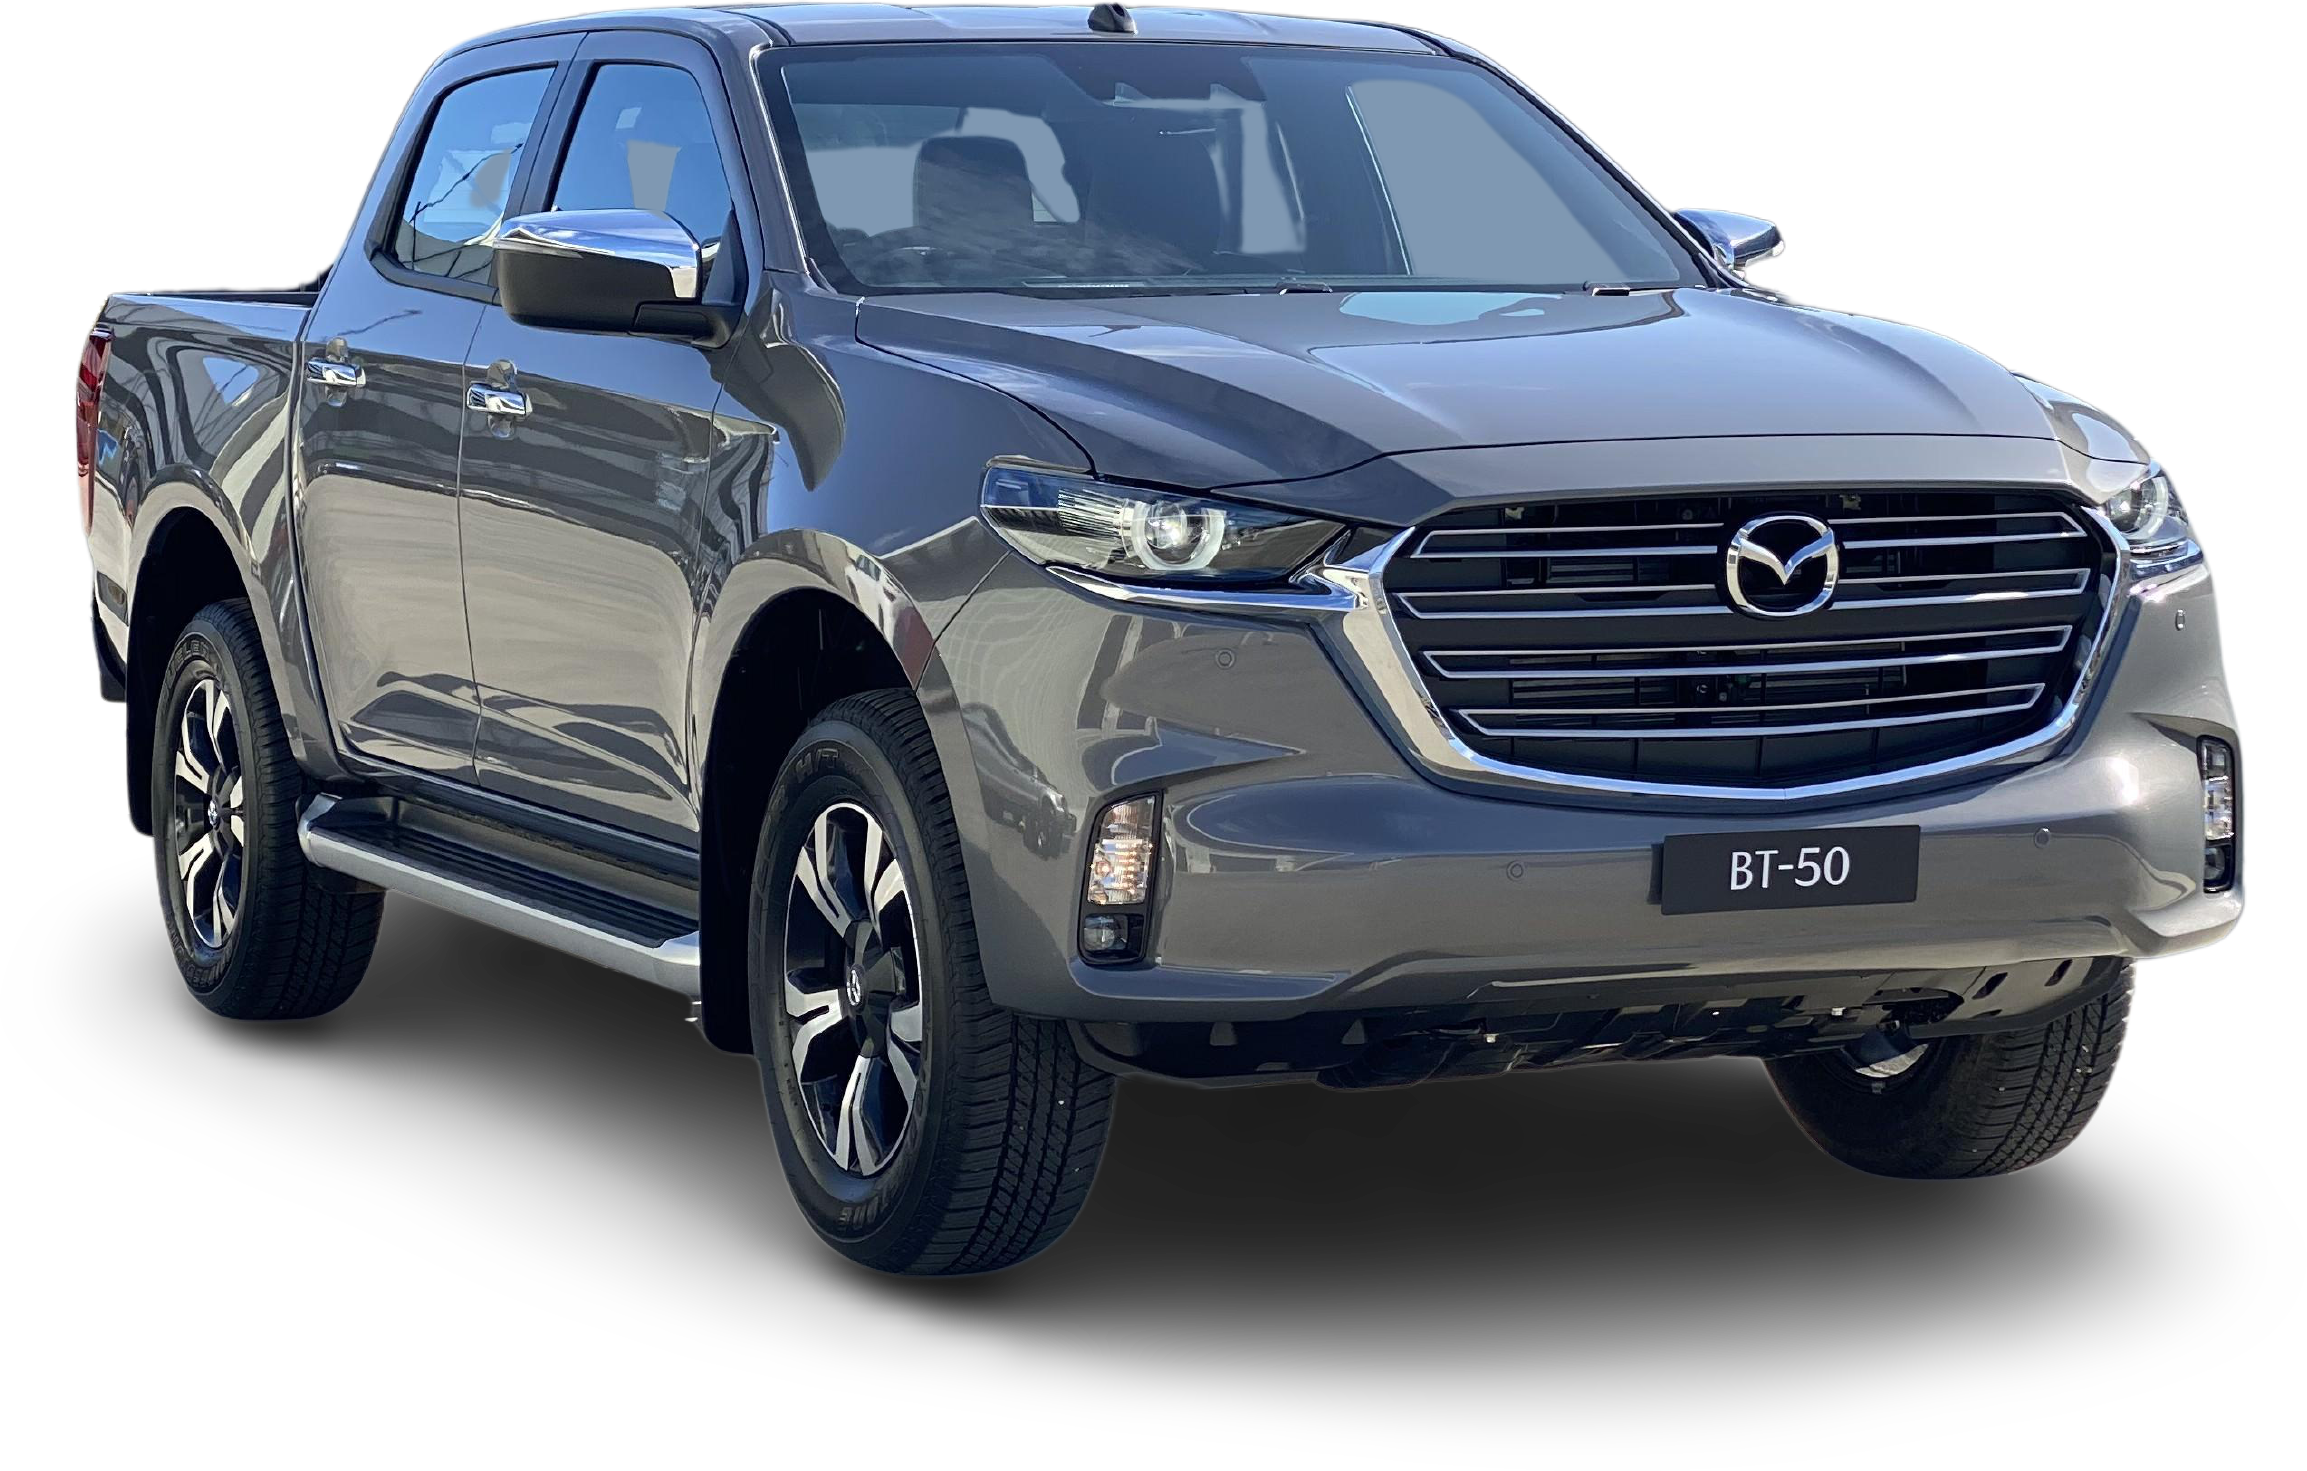 2020 Isuzu D-Max and Mazda BT-50: What are the differences? | CarExpert